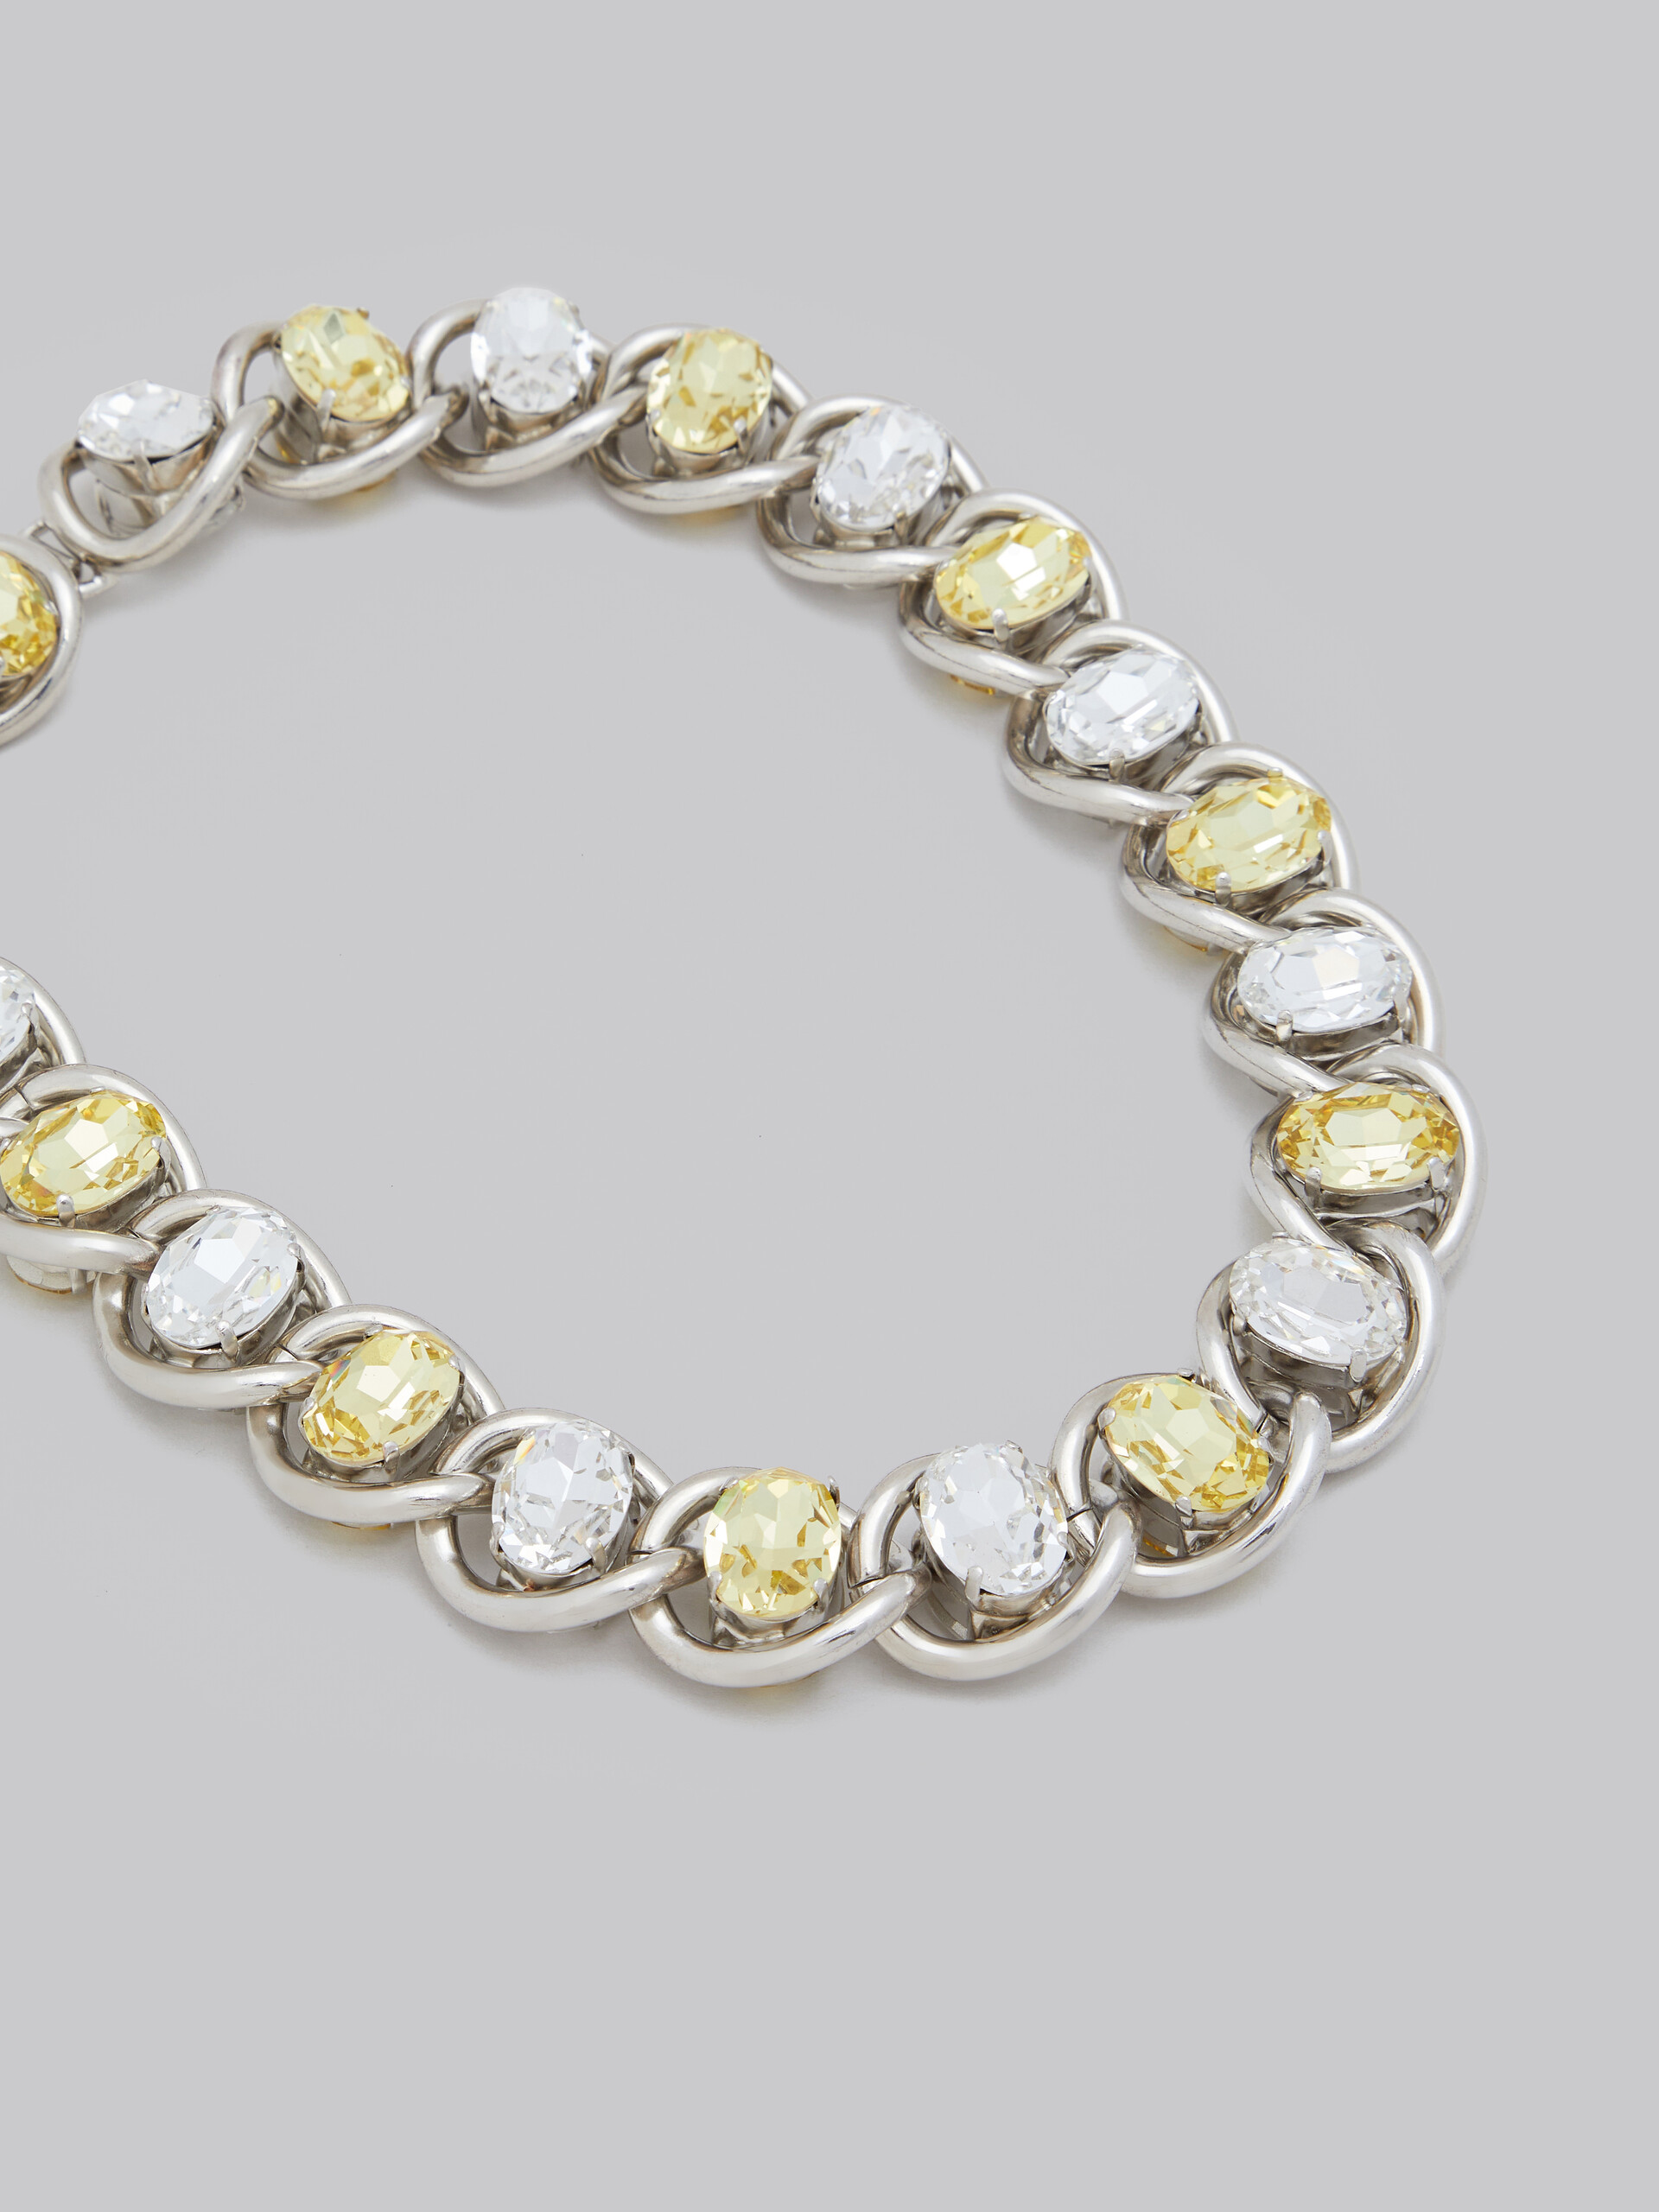 Clear and yellow rhinestone chunky chain necklace - Necklaces - Image 3